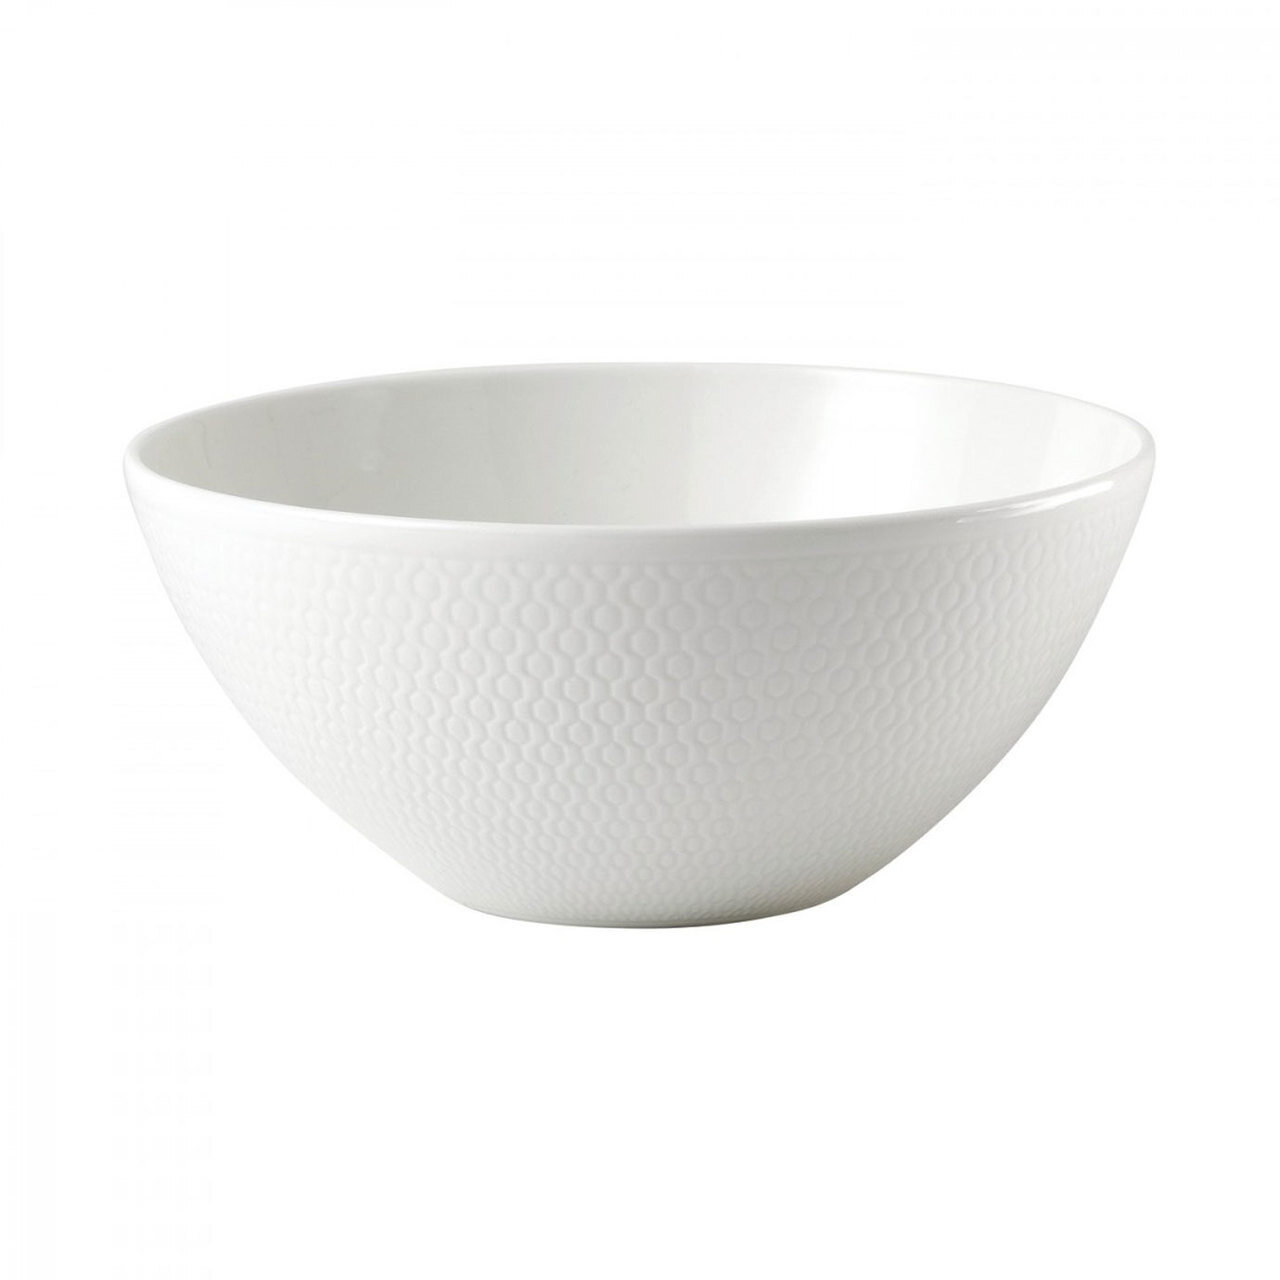 Wedgwood Gio Gio Soup Cereal Bowl 6.3 Inch